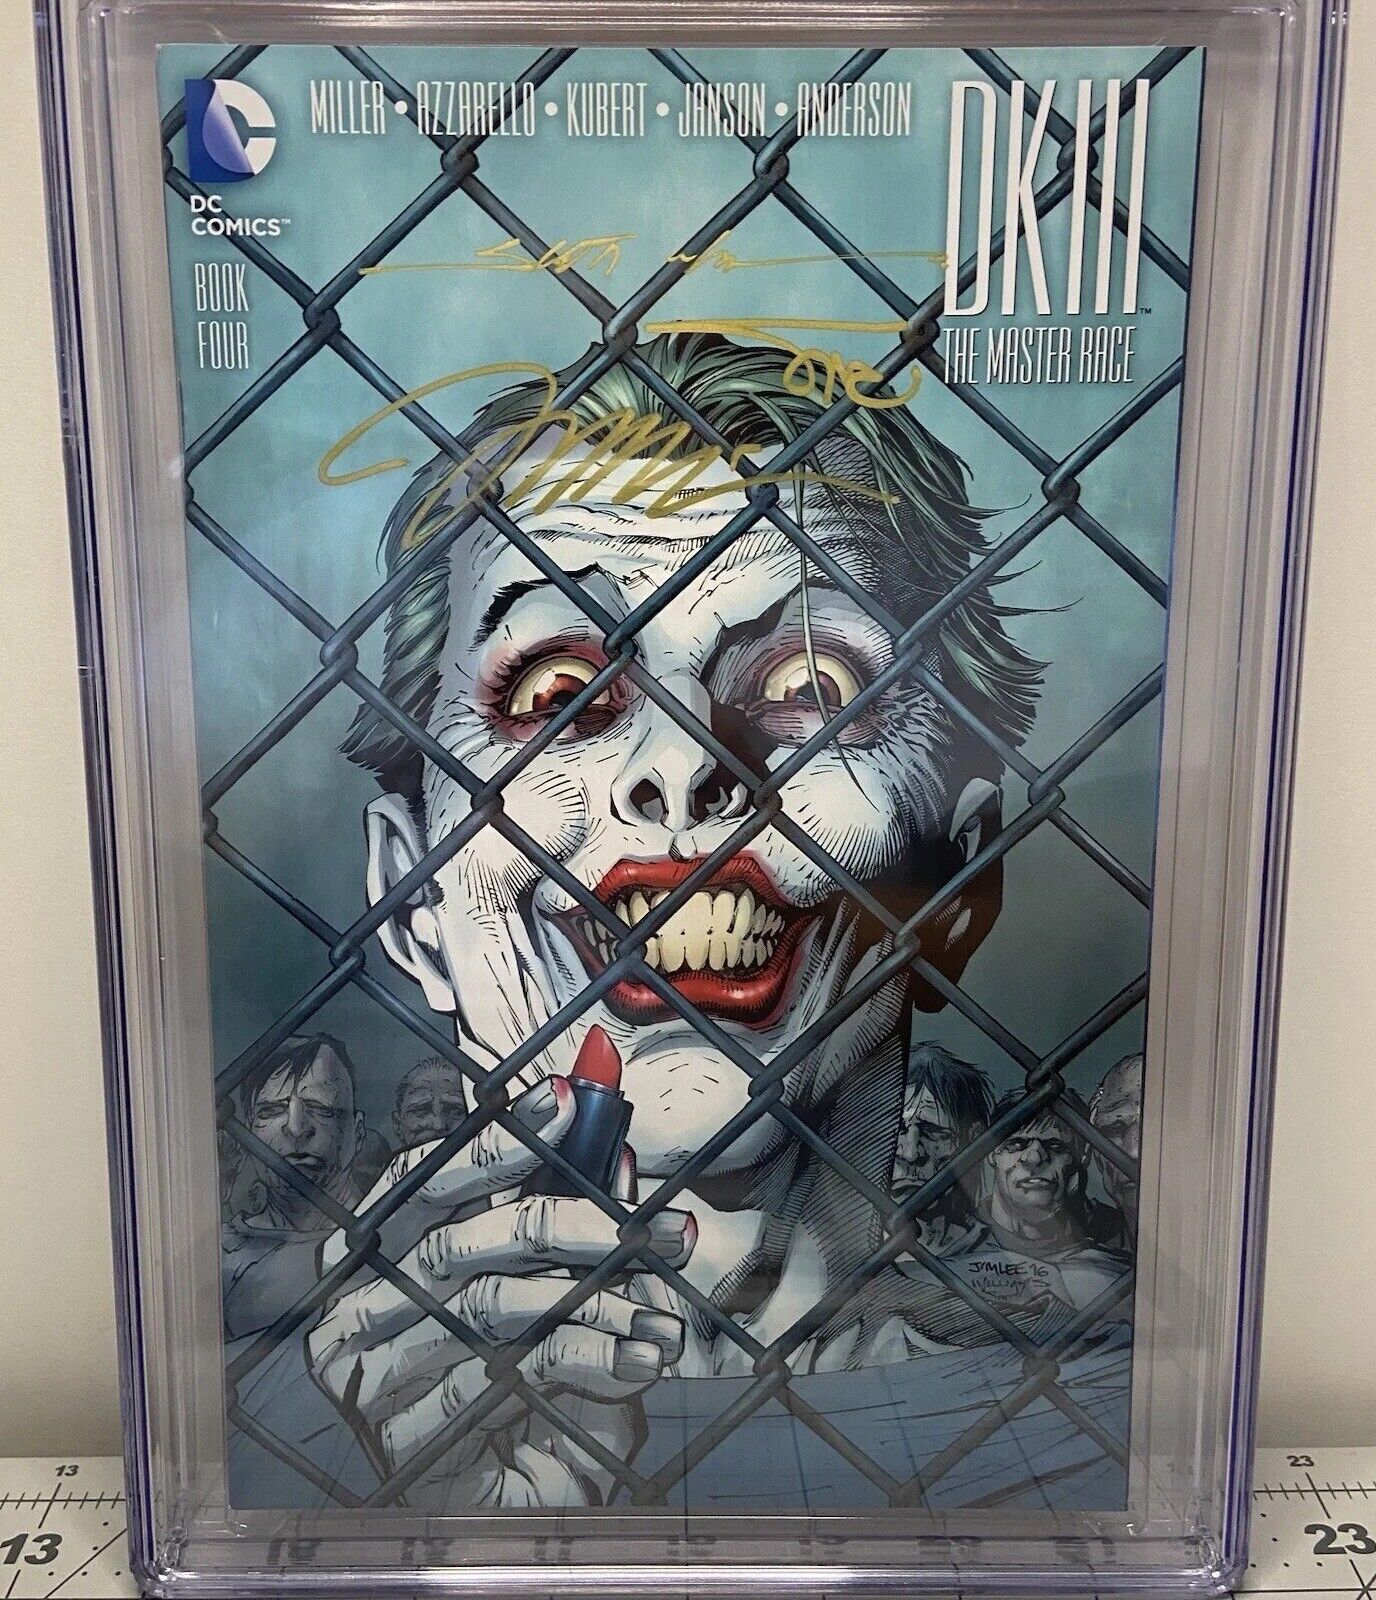 DARK KNIGHT 3 THE MASTER RACE 4 CGC SS 9.8 3X SIGNED LEE, SINCLAIR & WILLIAMS